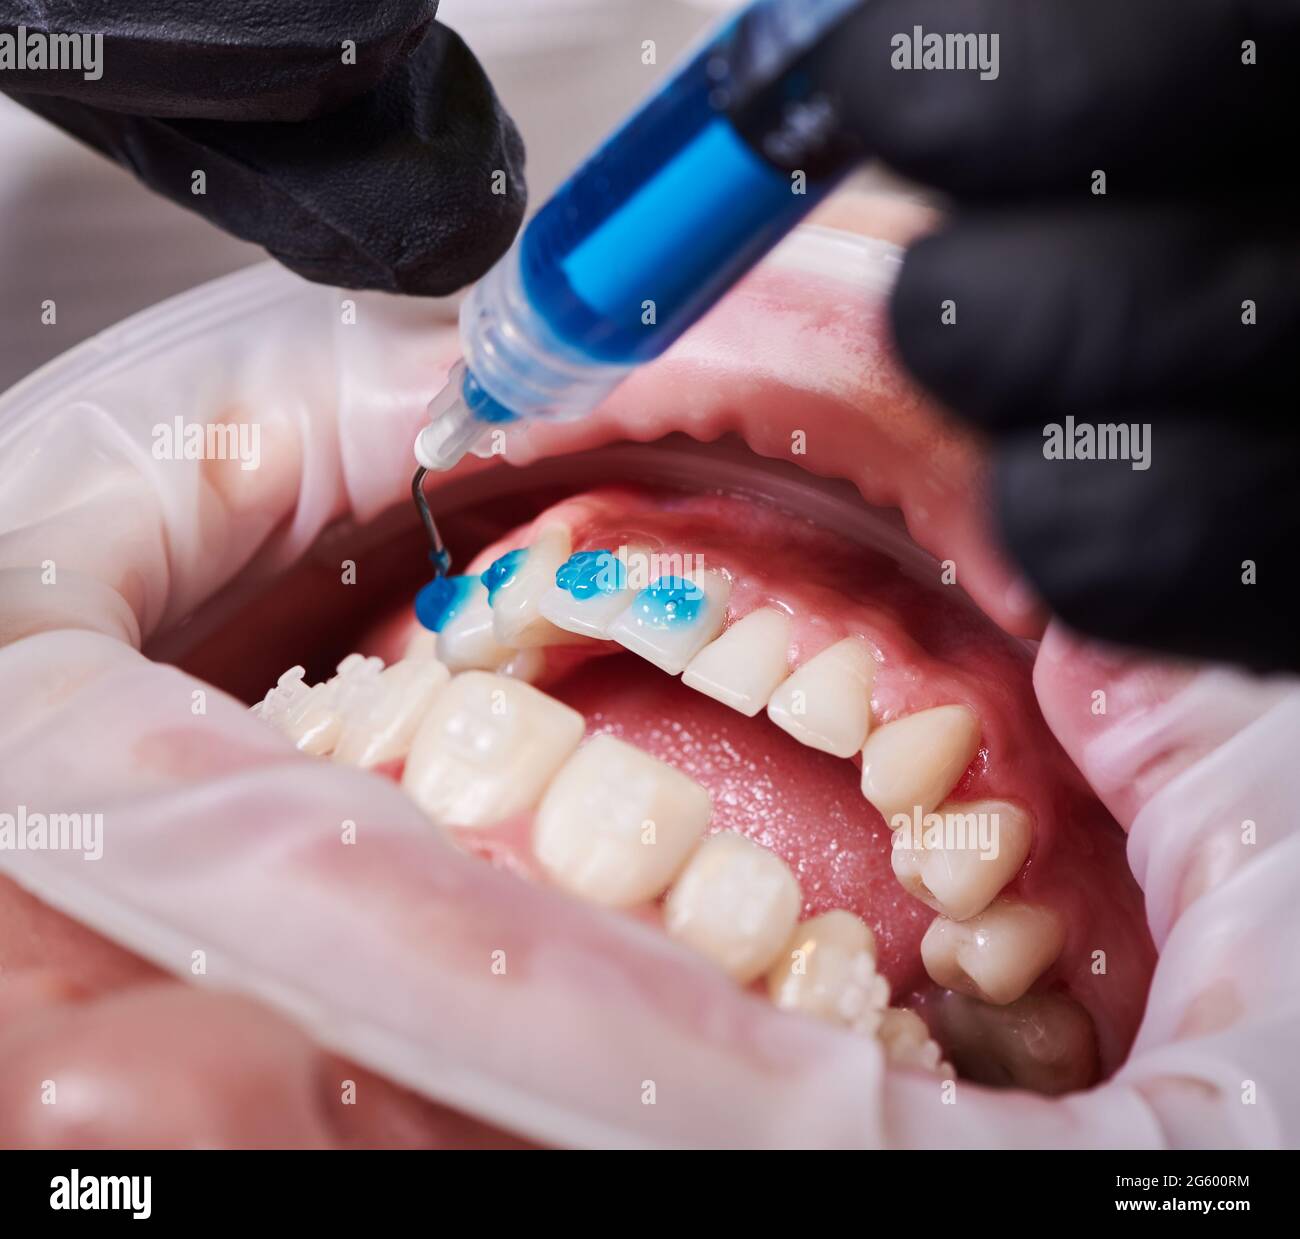 Ceramic braces installation process. Close-up top view on dentist's hands putting some blue glue on patient's clean lower teeth before attaching braces. Dental accessories concept Stock Photo